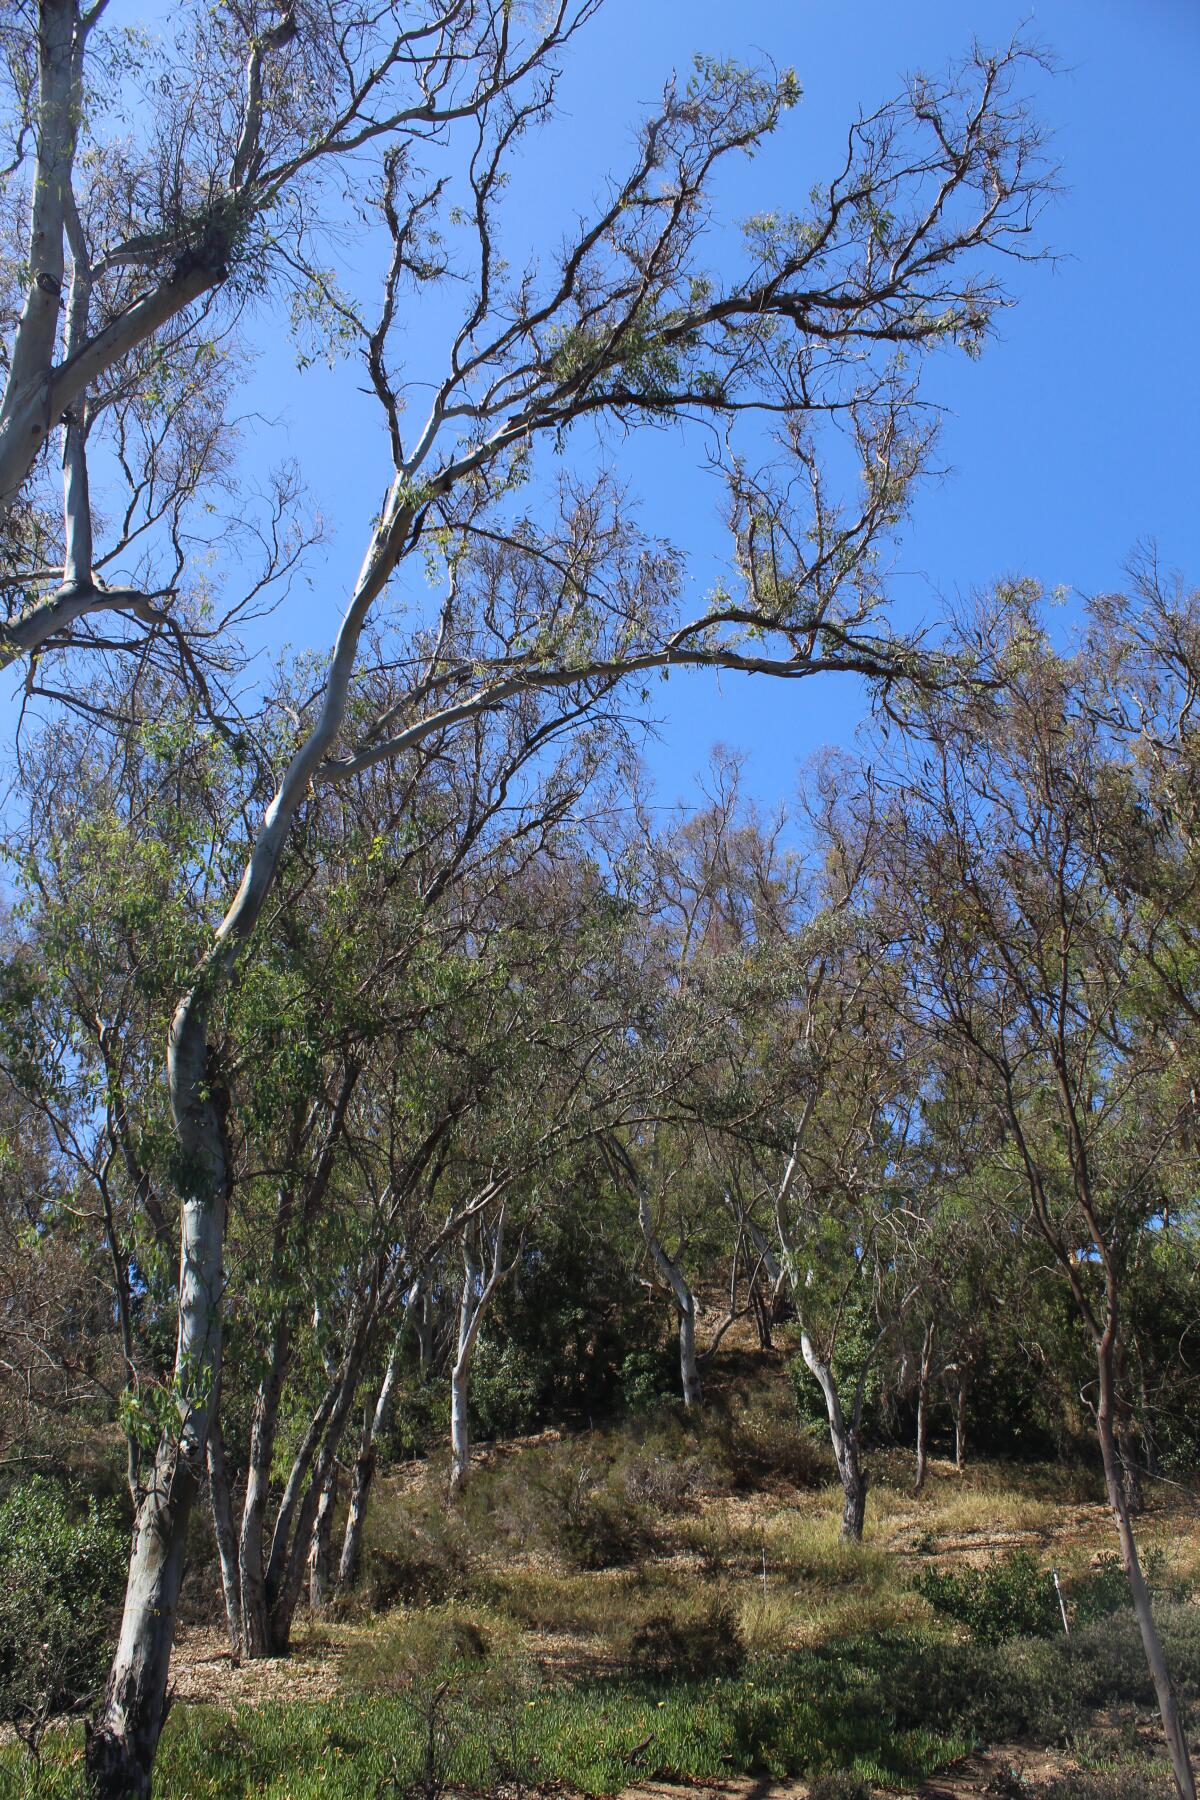 Dead and dying trees pose a fire risk for Rancho Santa Fe homes and communities.